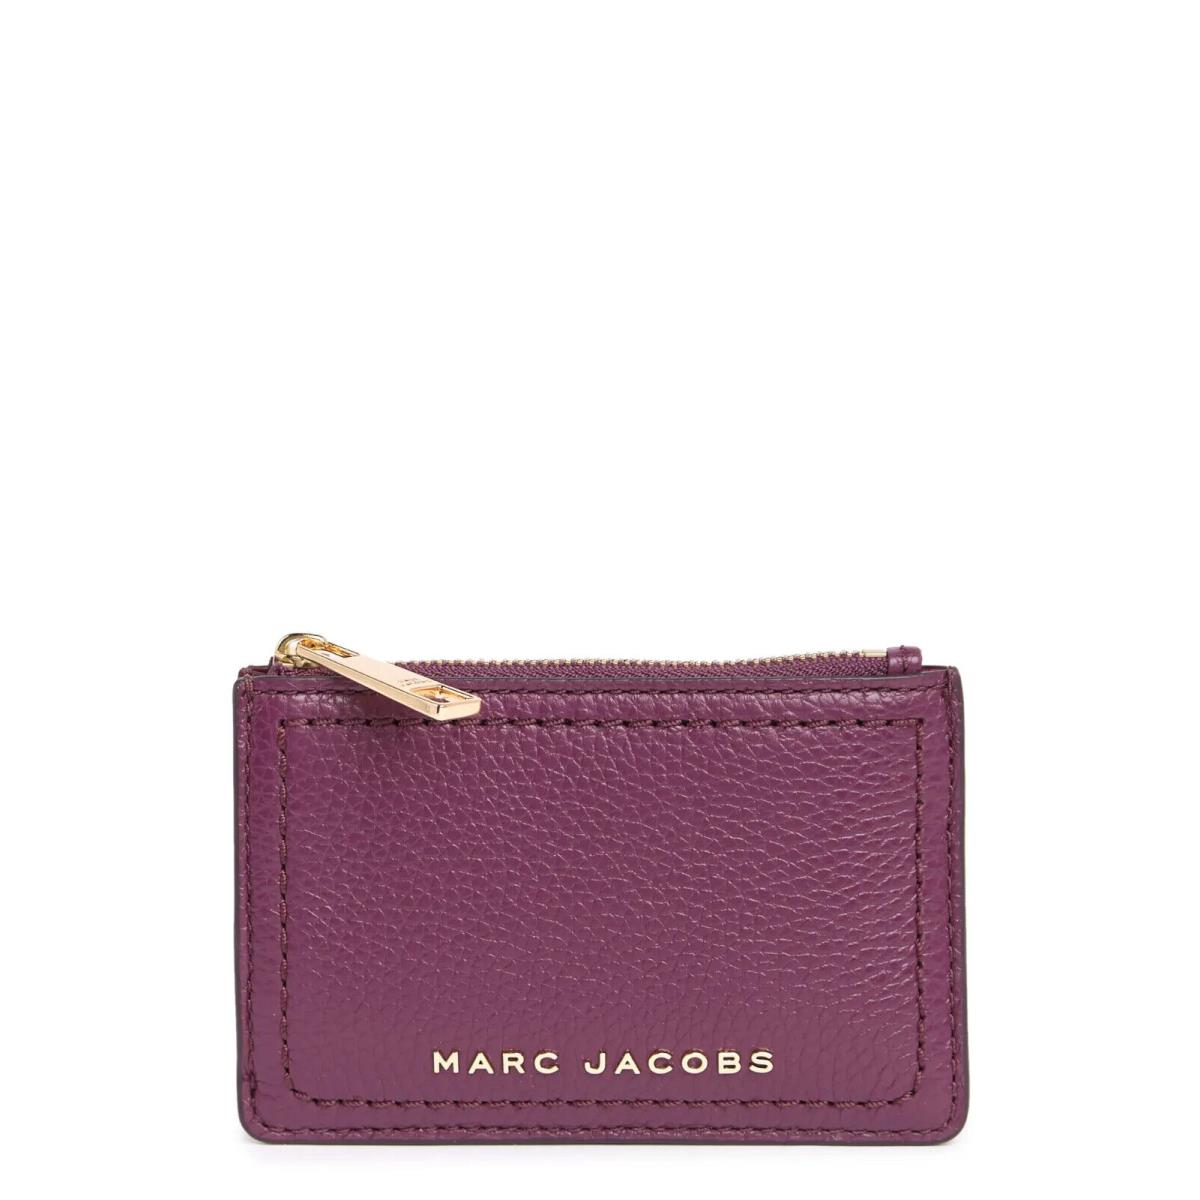 Marc Jacobs The Groove Top Zip Leather Coin Purse Prune Pebbled Leather